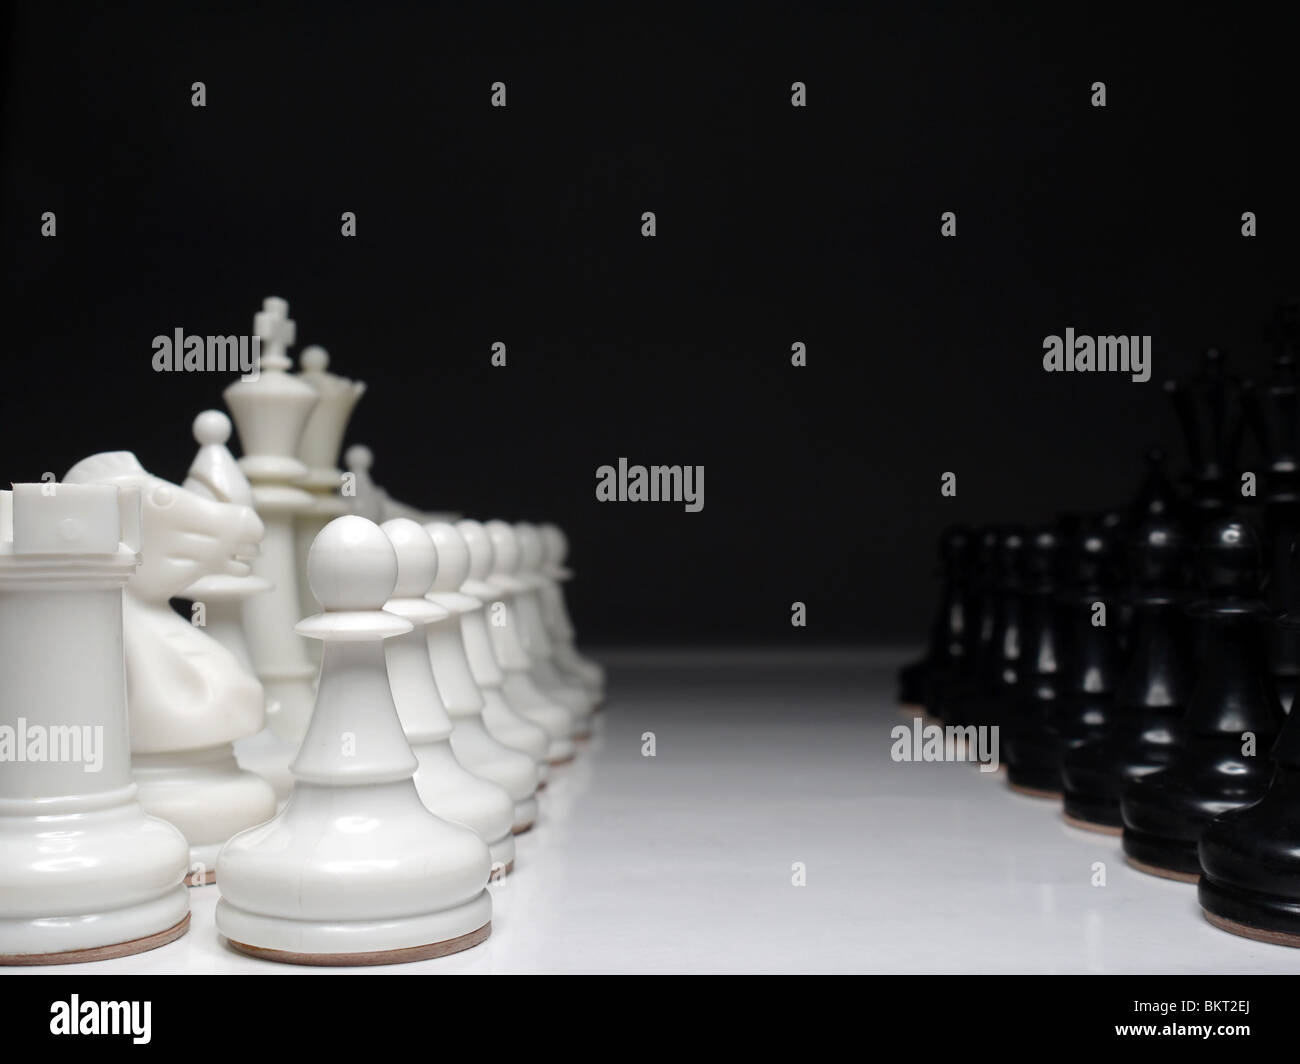 Rows of white and black set of chessmen standing face to face over black background Stock Photo